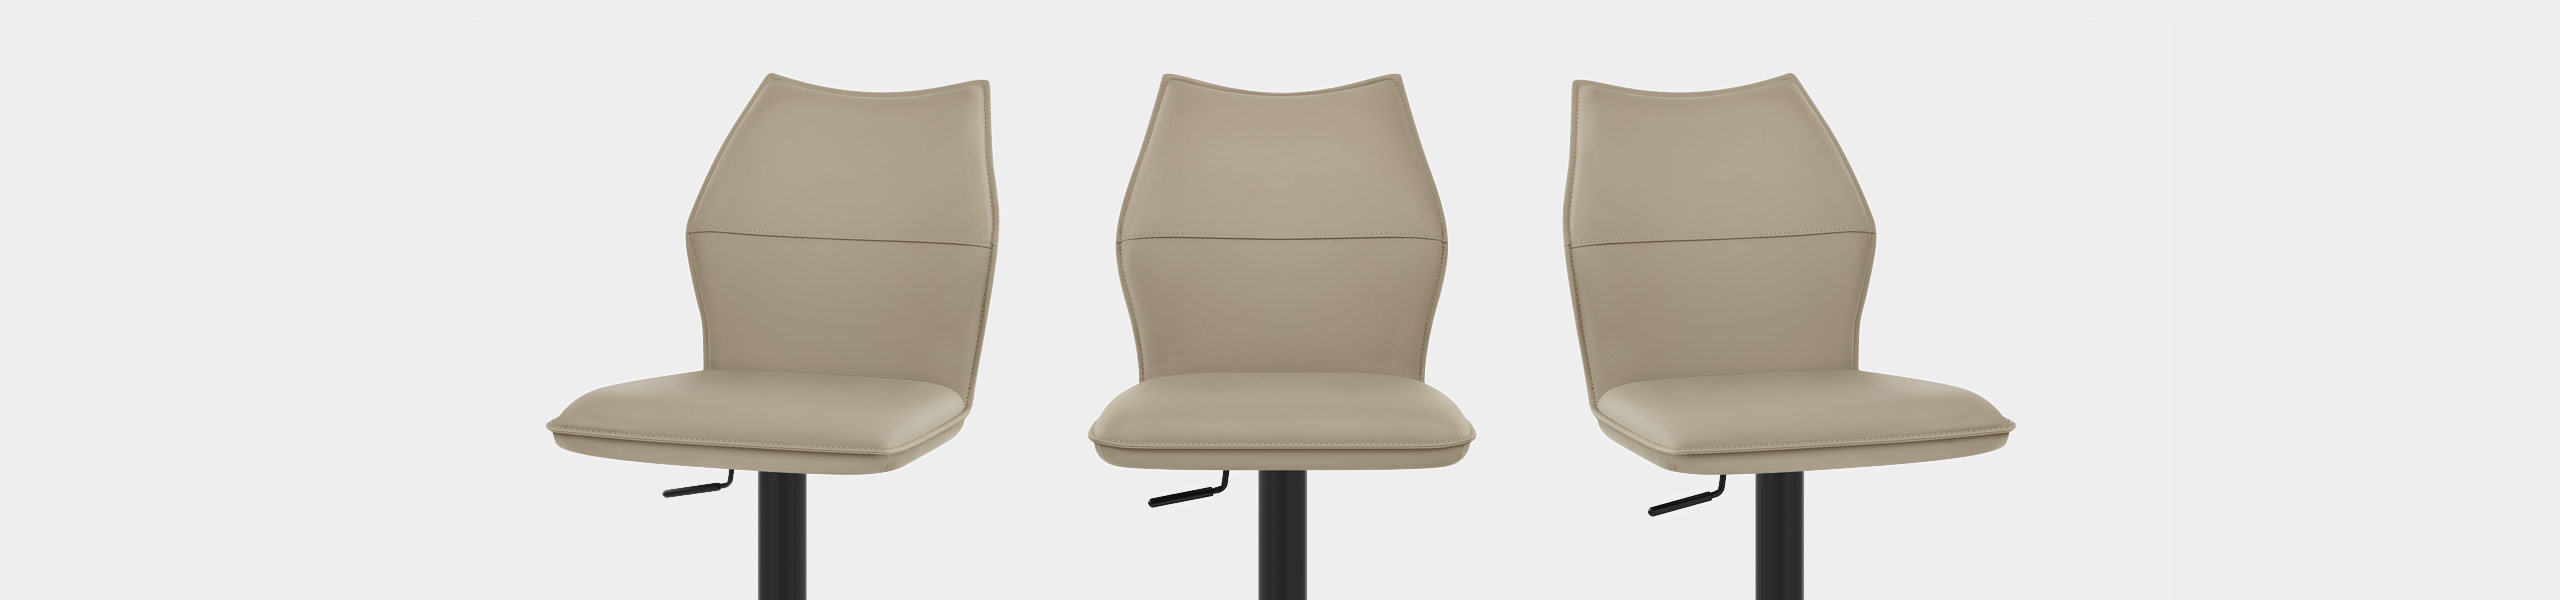 Ava Bar Stool Taupe Video Banner